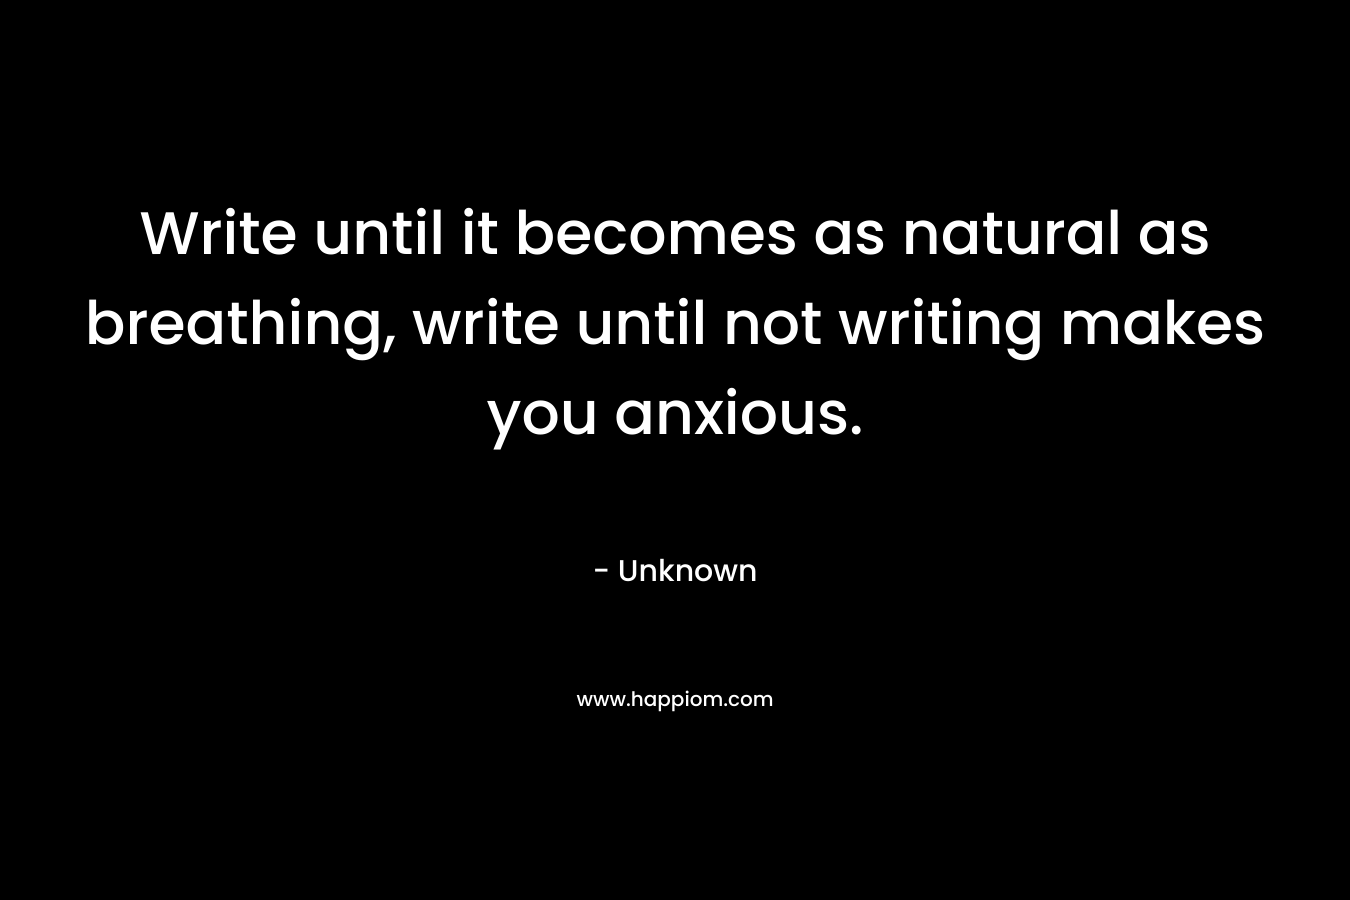 Write until it becomes as natural as breathing, write until not writing makes you anxious.